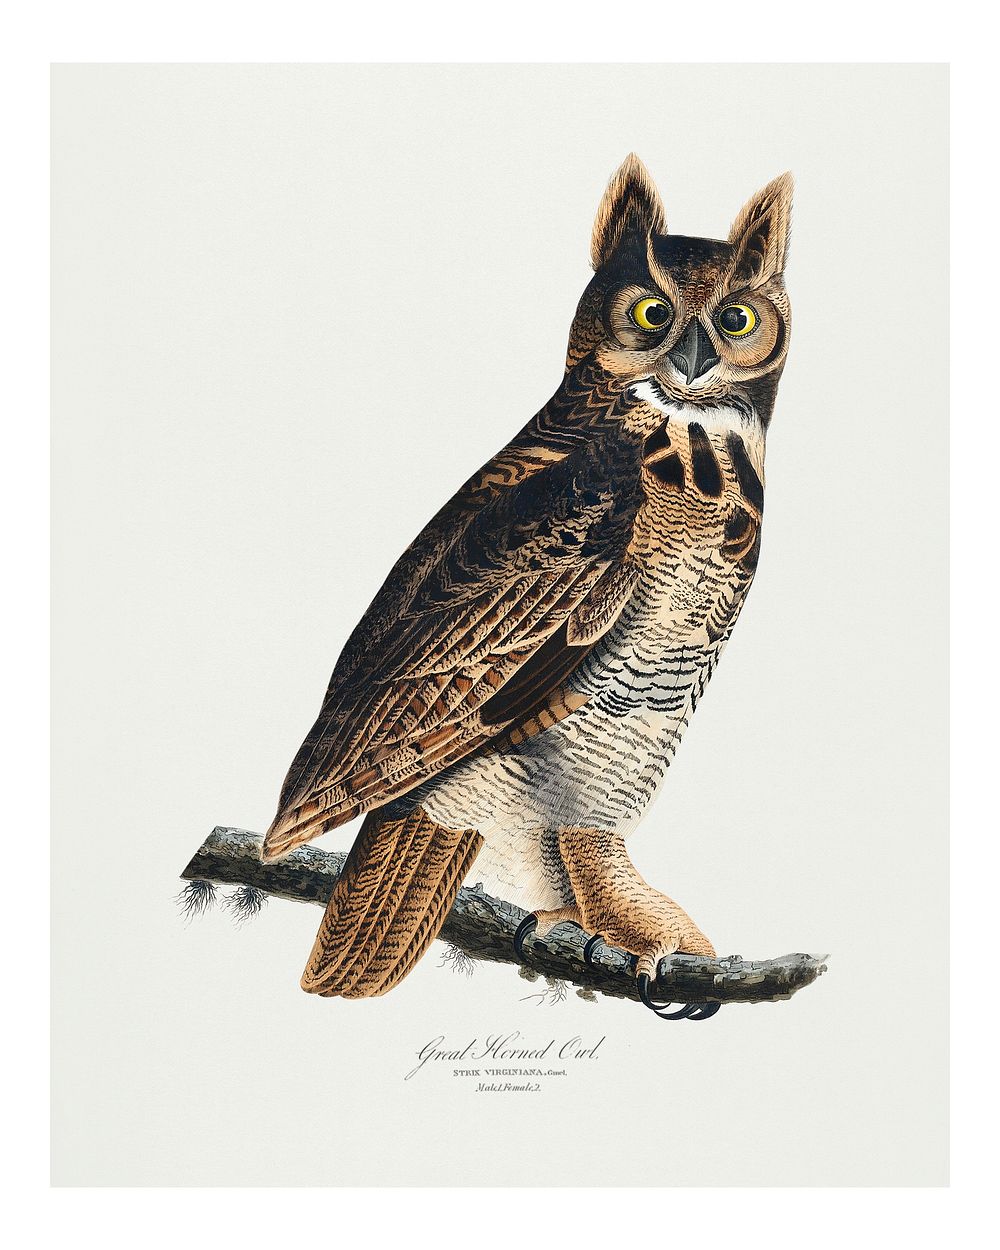 Vintage Great Horned Owl wall art print and poster.